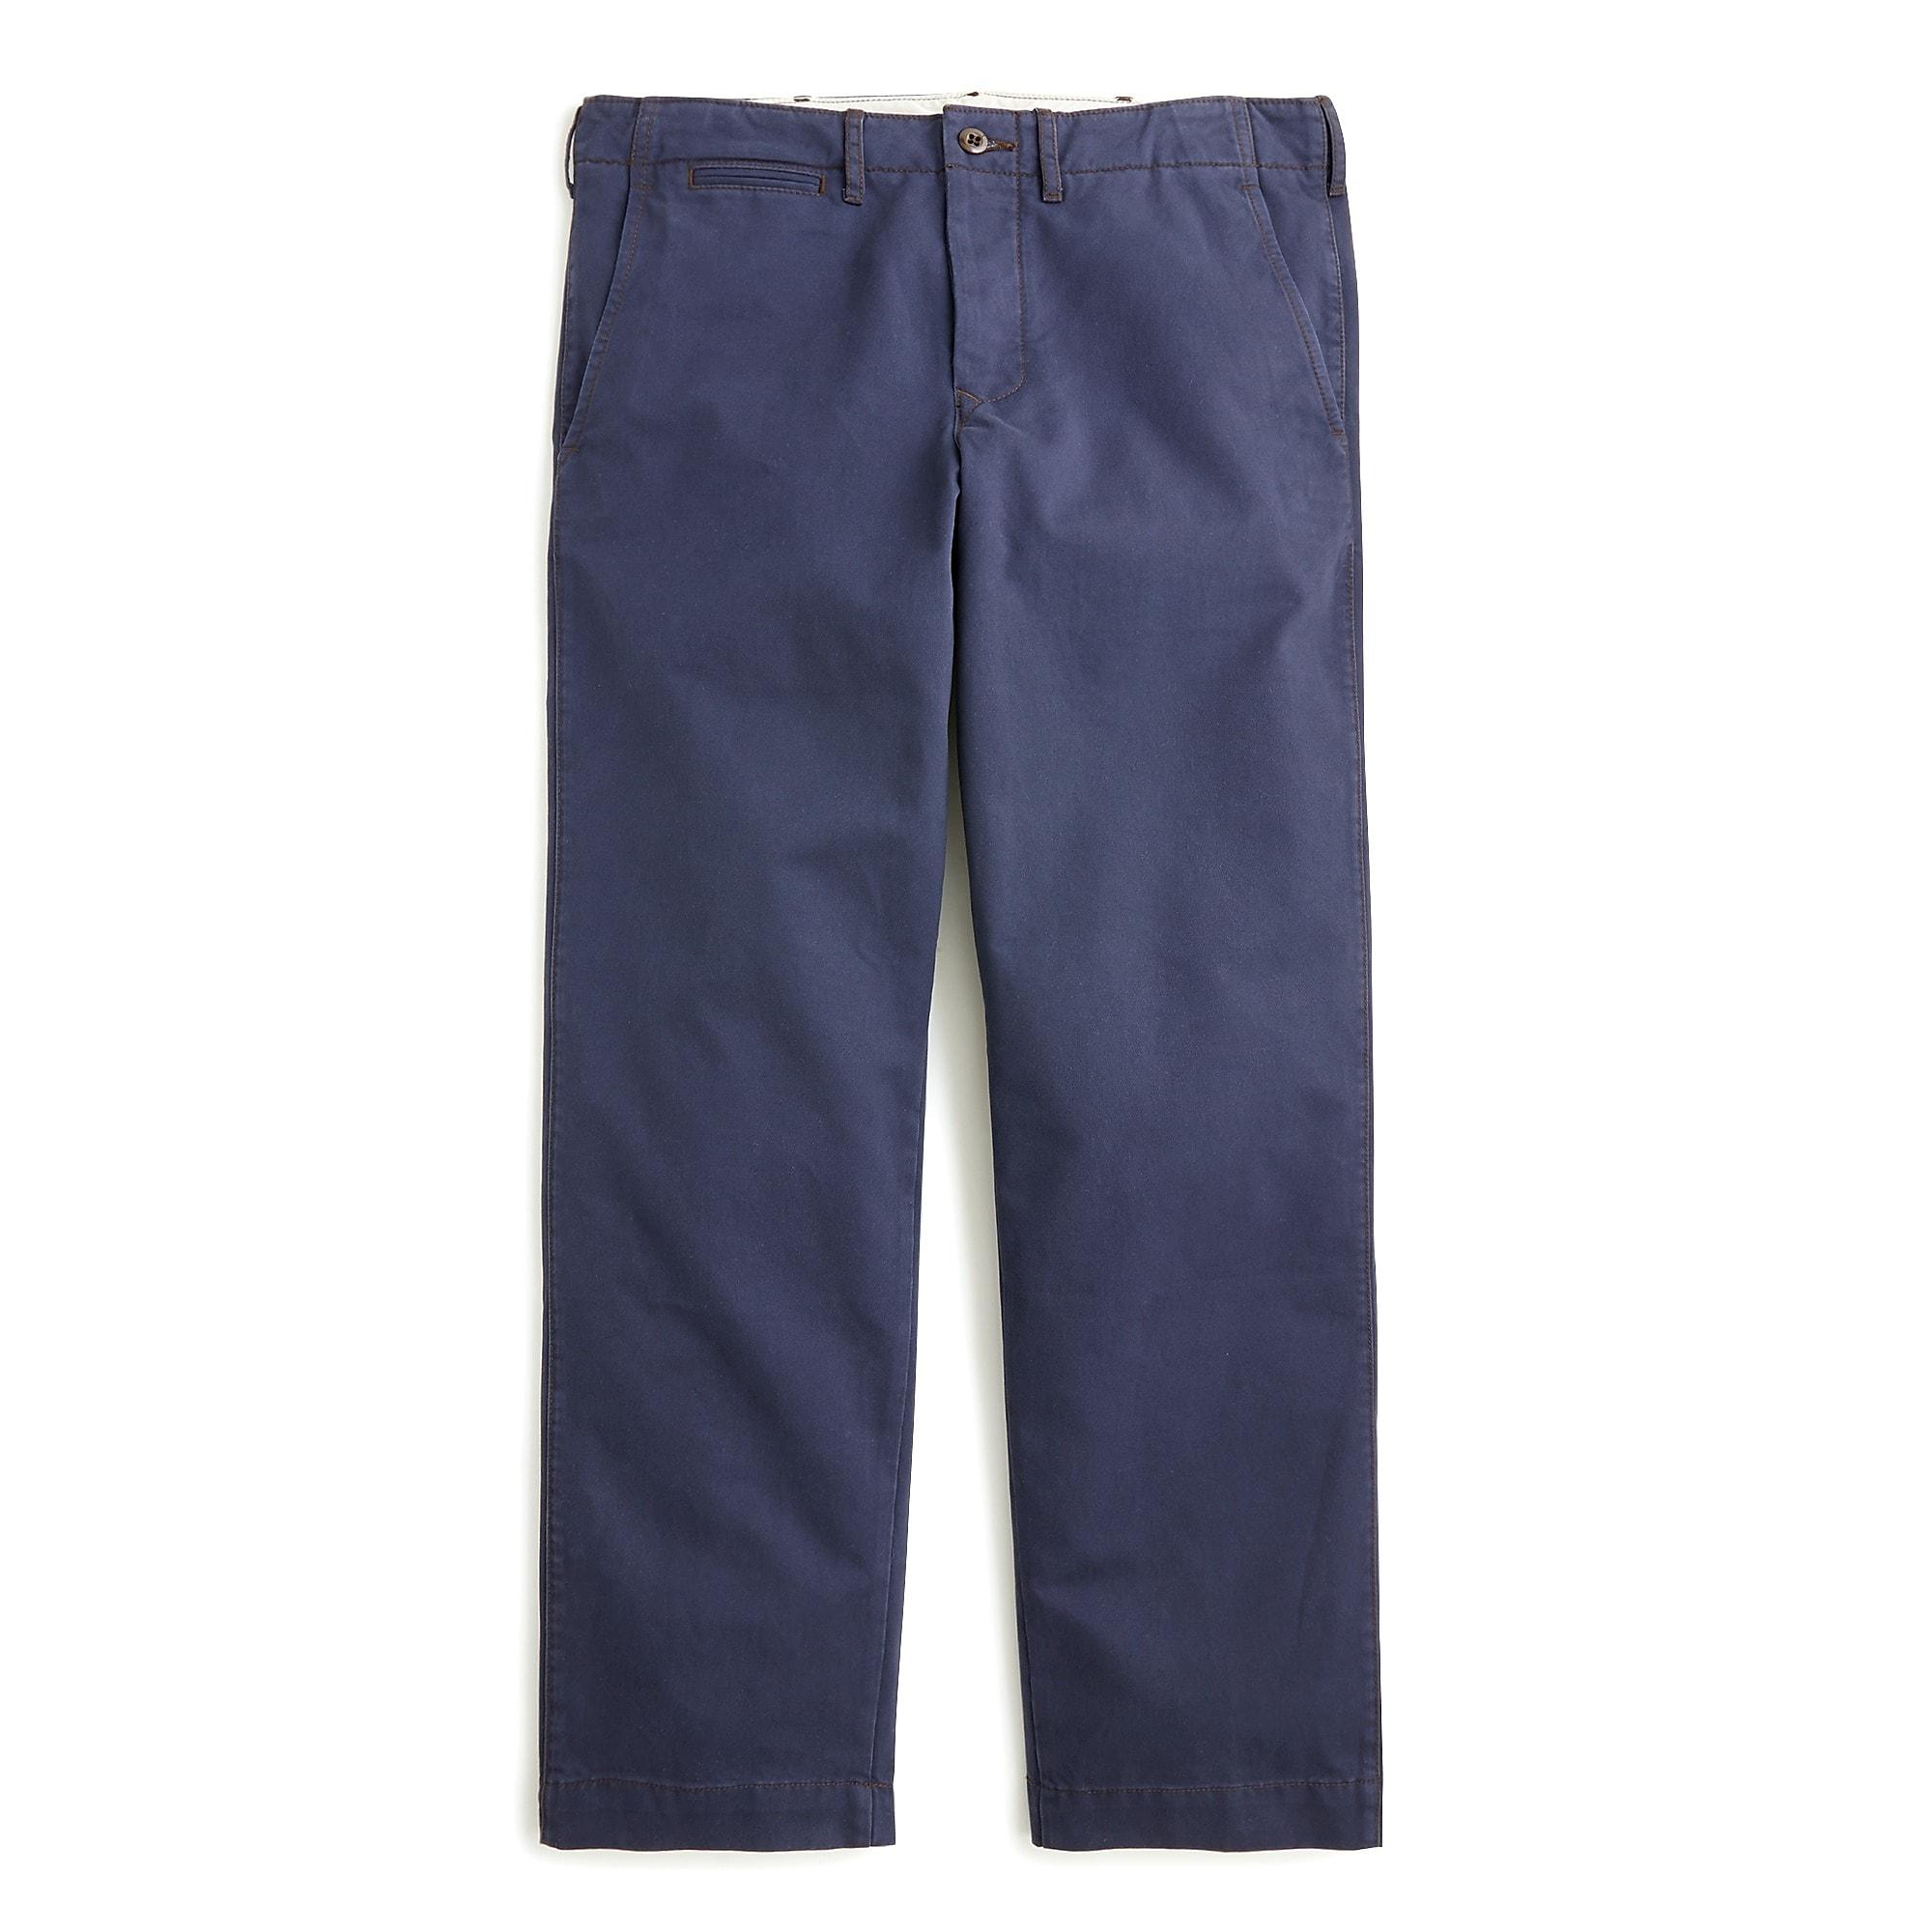 Lyst - J.Crew Wallace & Barnes Military Officer's Chino In Cotton Twill ...